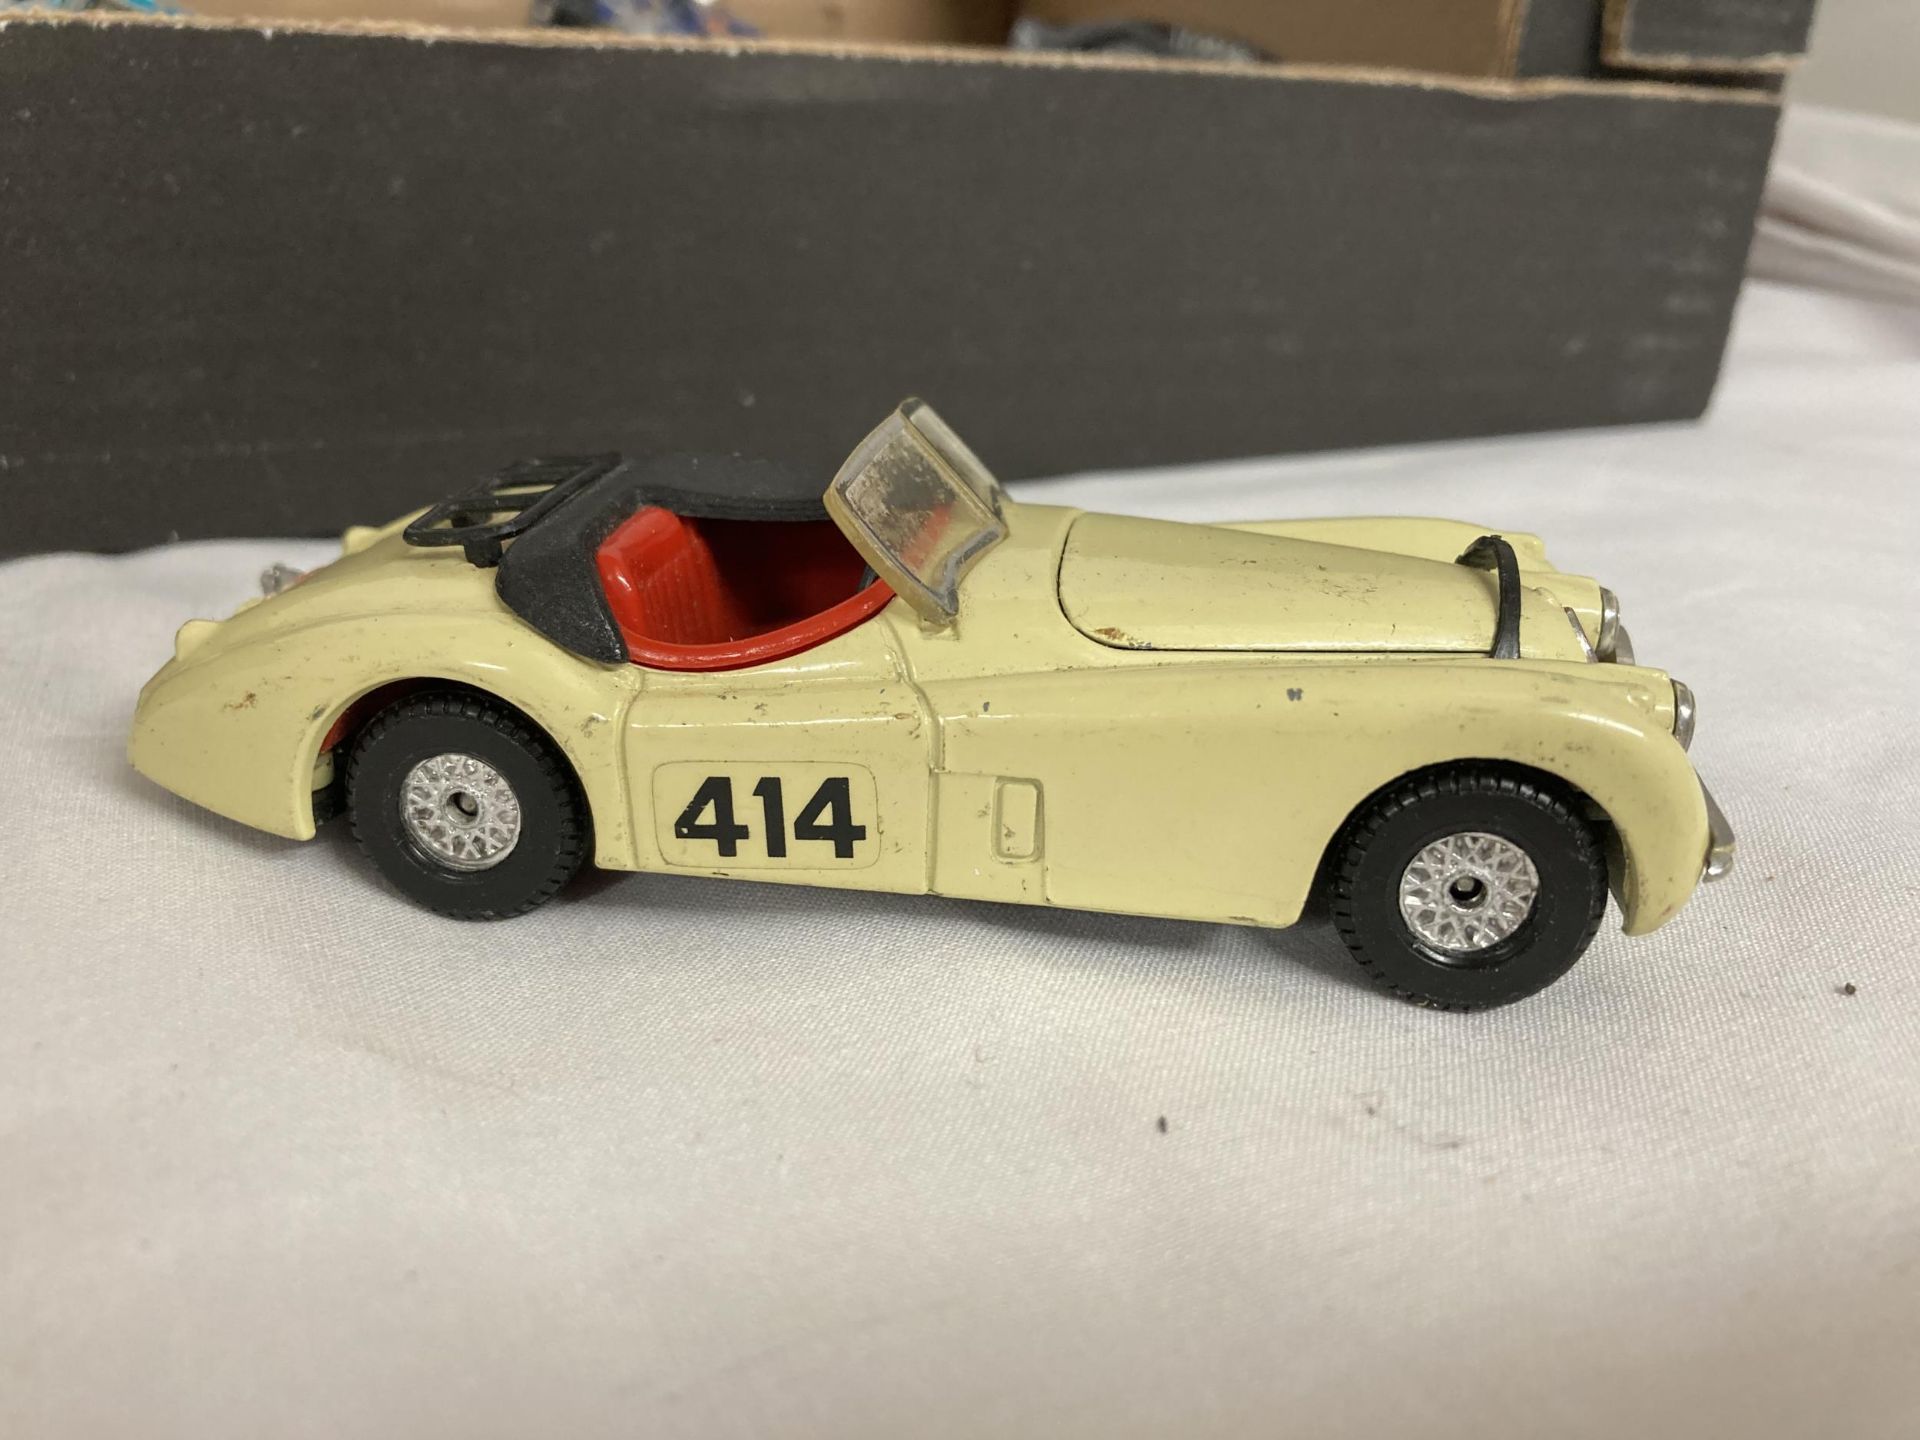 A BOX OF 22 SPORT'S CARS TO INCLUDE CORGI AND MATCHBOX - Image 2 of 5